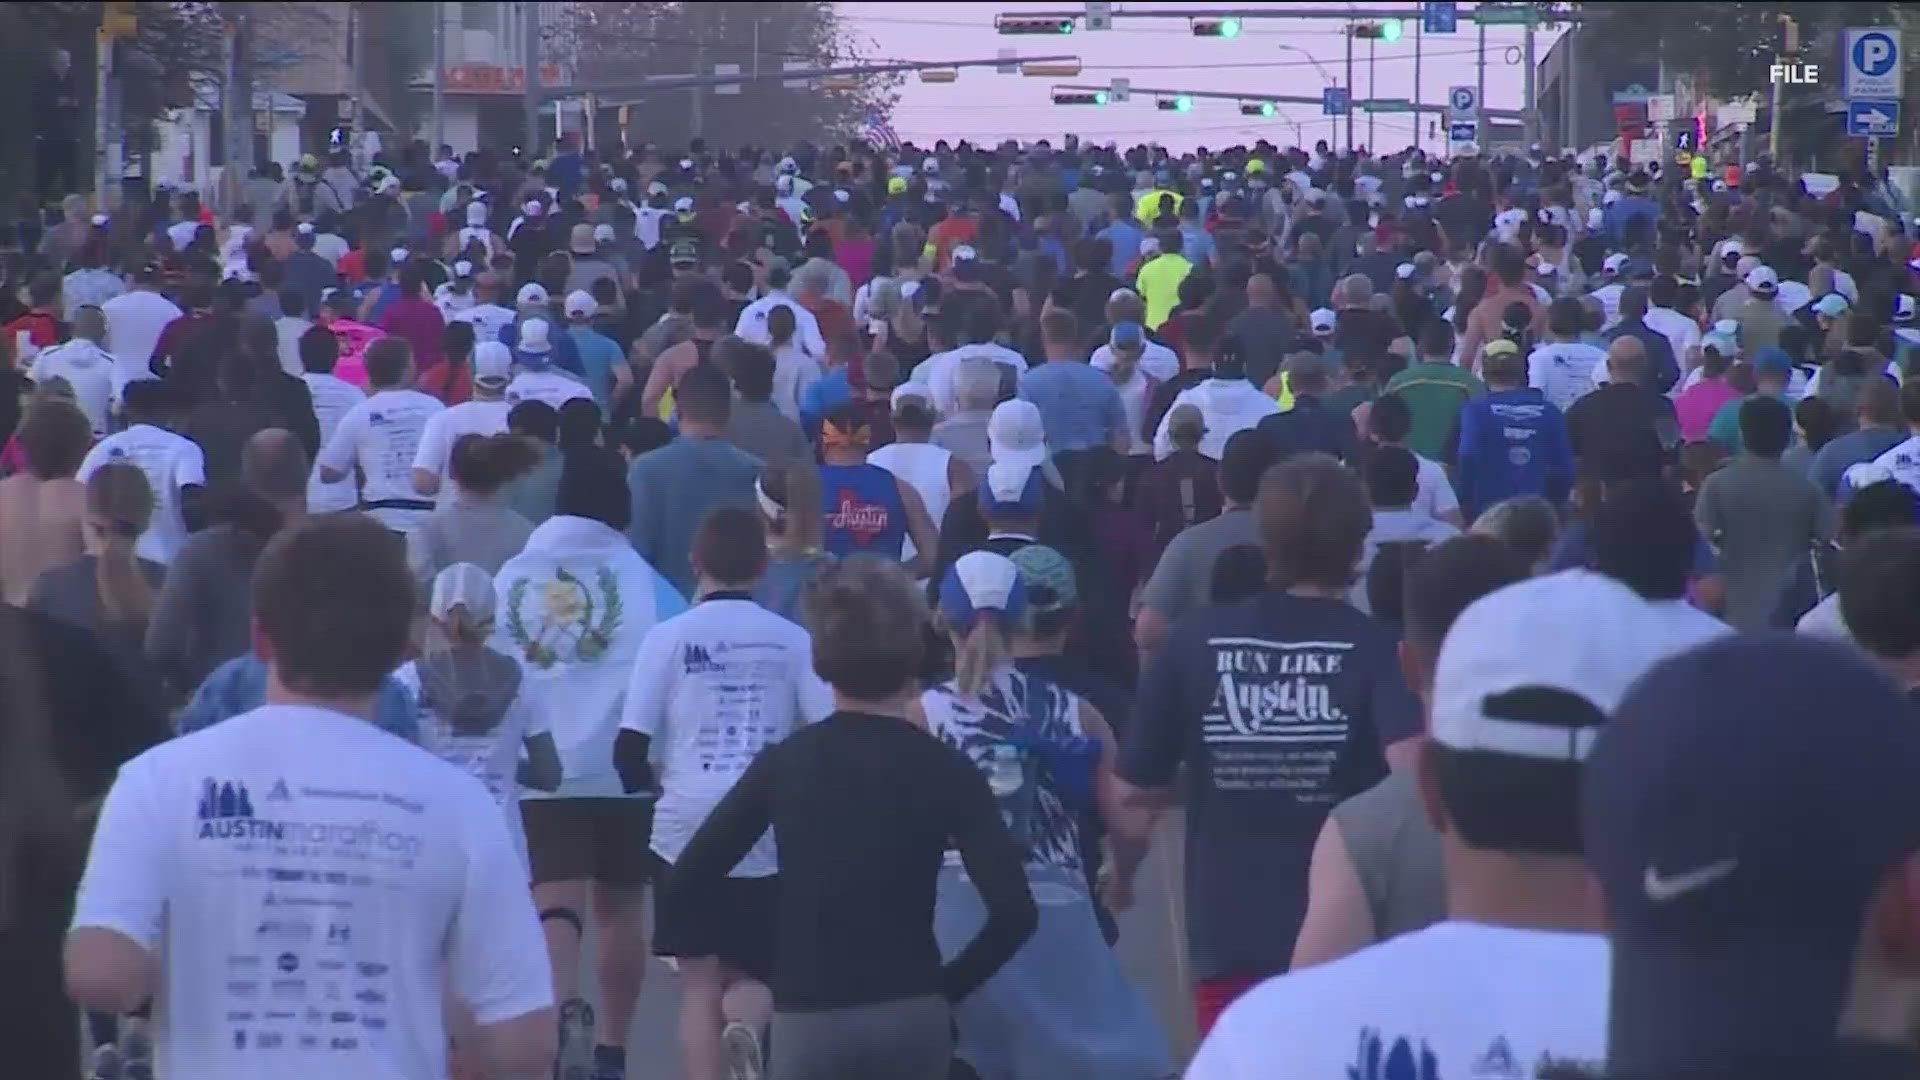 For more than 30 years, thousands of runners have gathered on the streets of downtown Austin for the annual marathon. Here's which roads will be impacted this year.